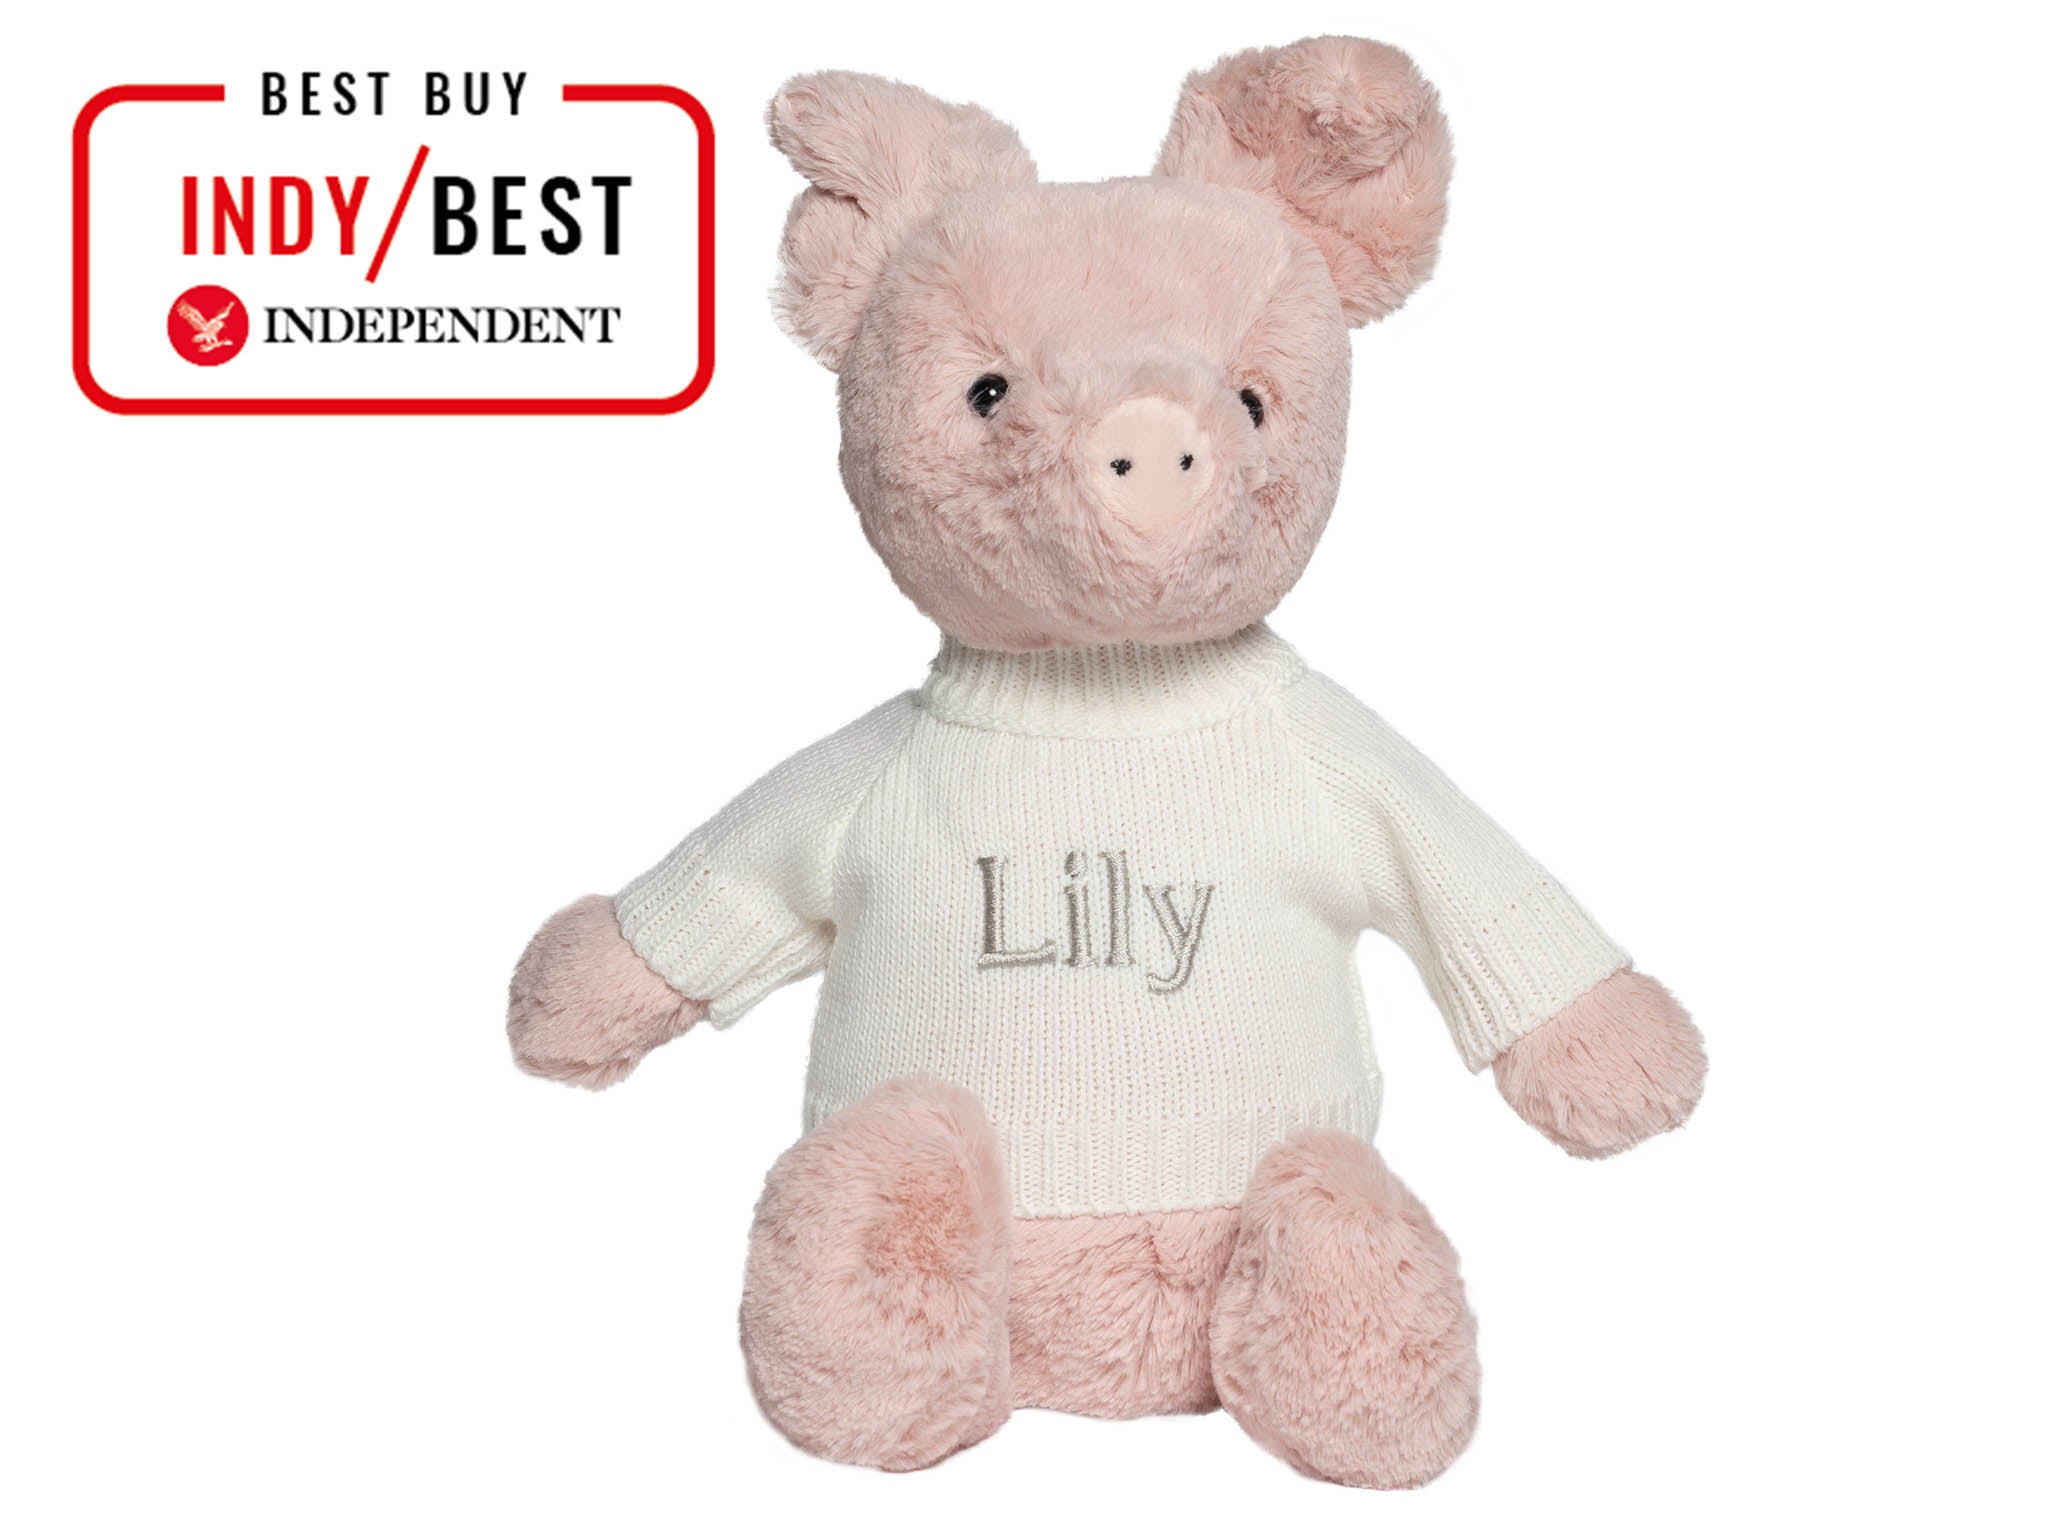 Best Buy IndyBest Personalised Jellycat bashful piglet soft toy, IndyBest, That’s Mine.jpg